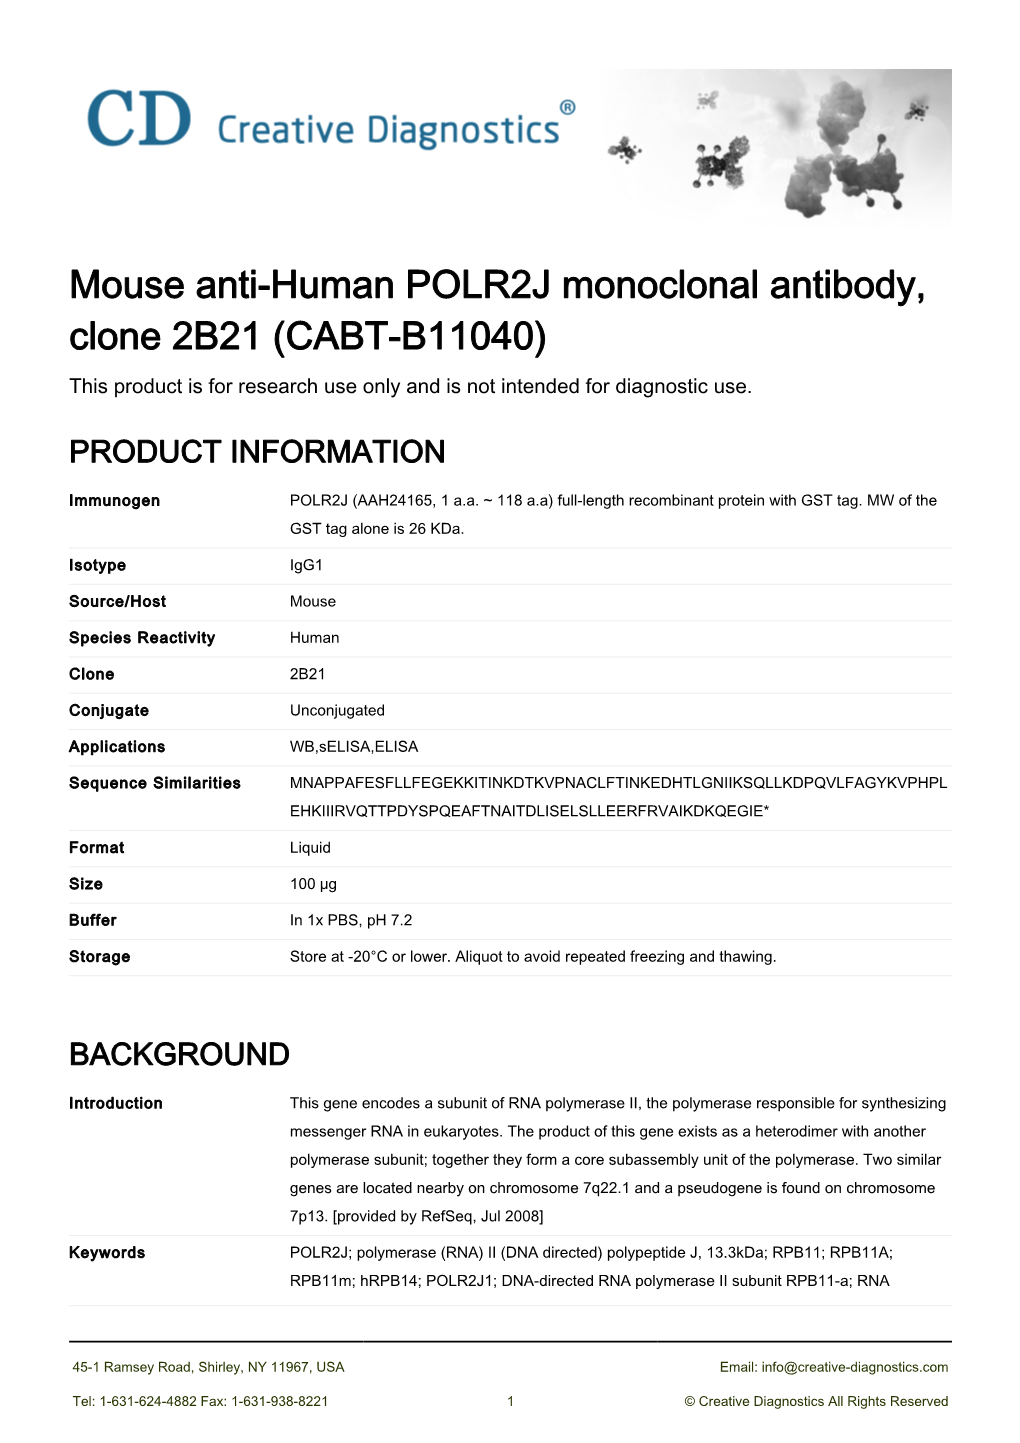 Mouse Anti-Human POLR2J Monoclonal Antibody, Clone 2B21 (CABT-B11040) This Product Is for Research Use Only and Is Not Intended for Diagnostic Use